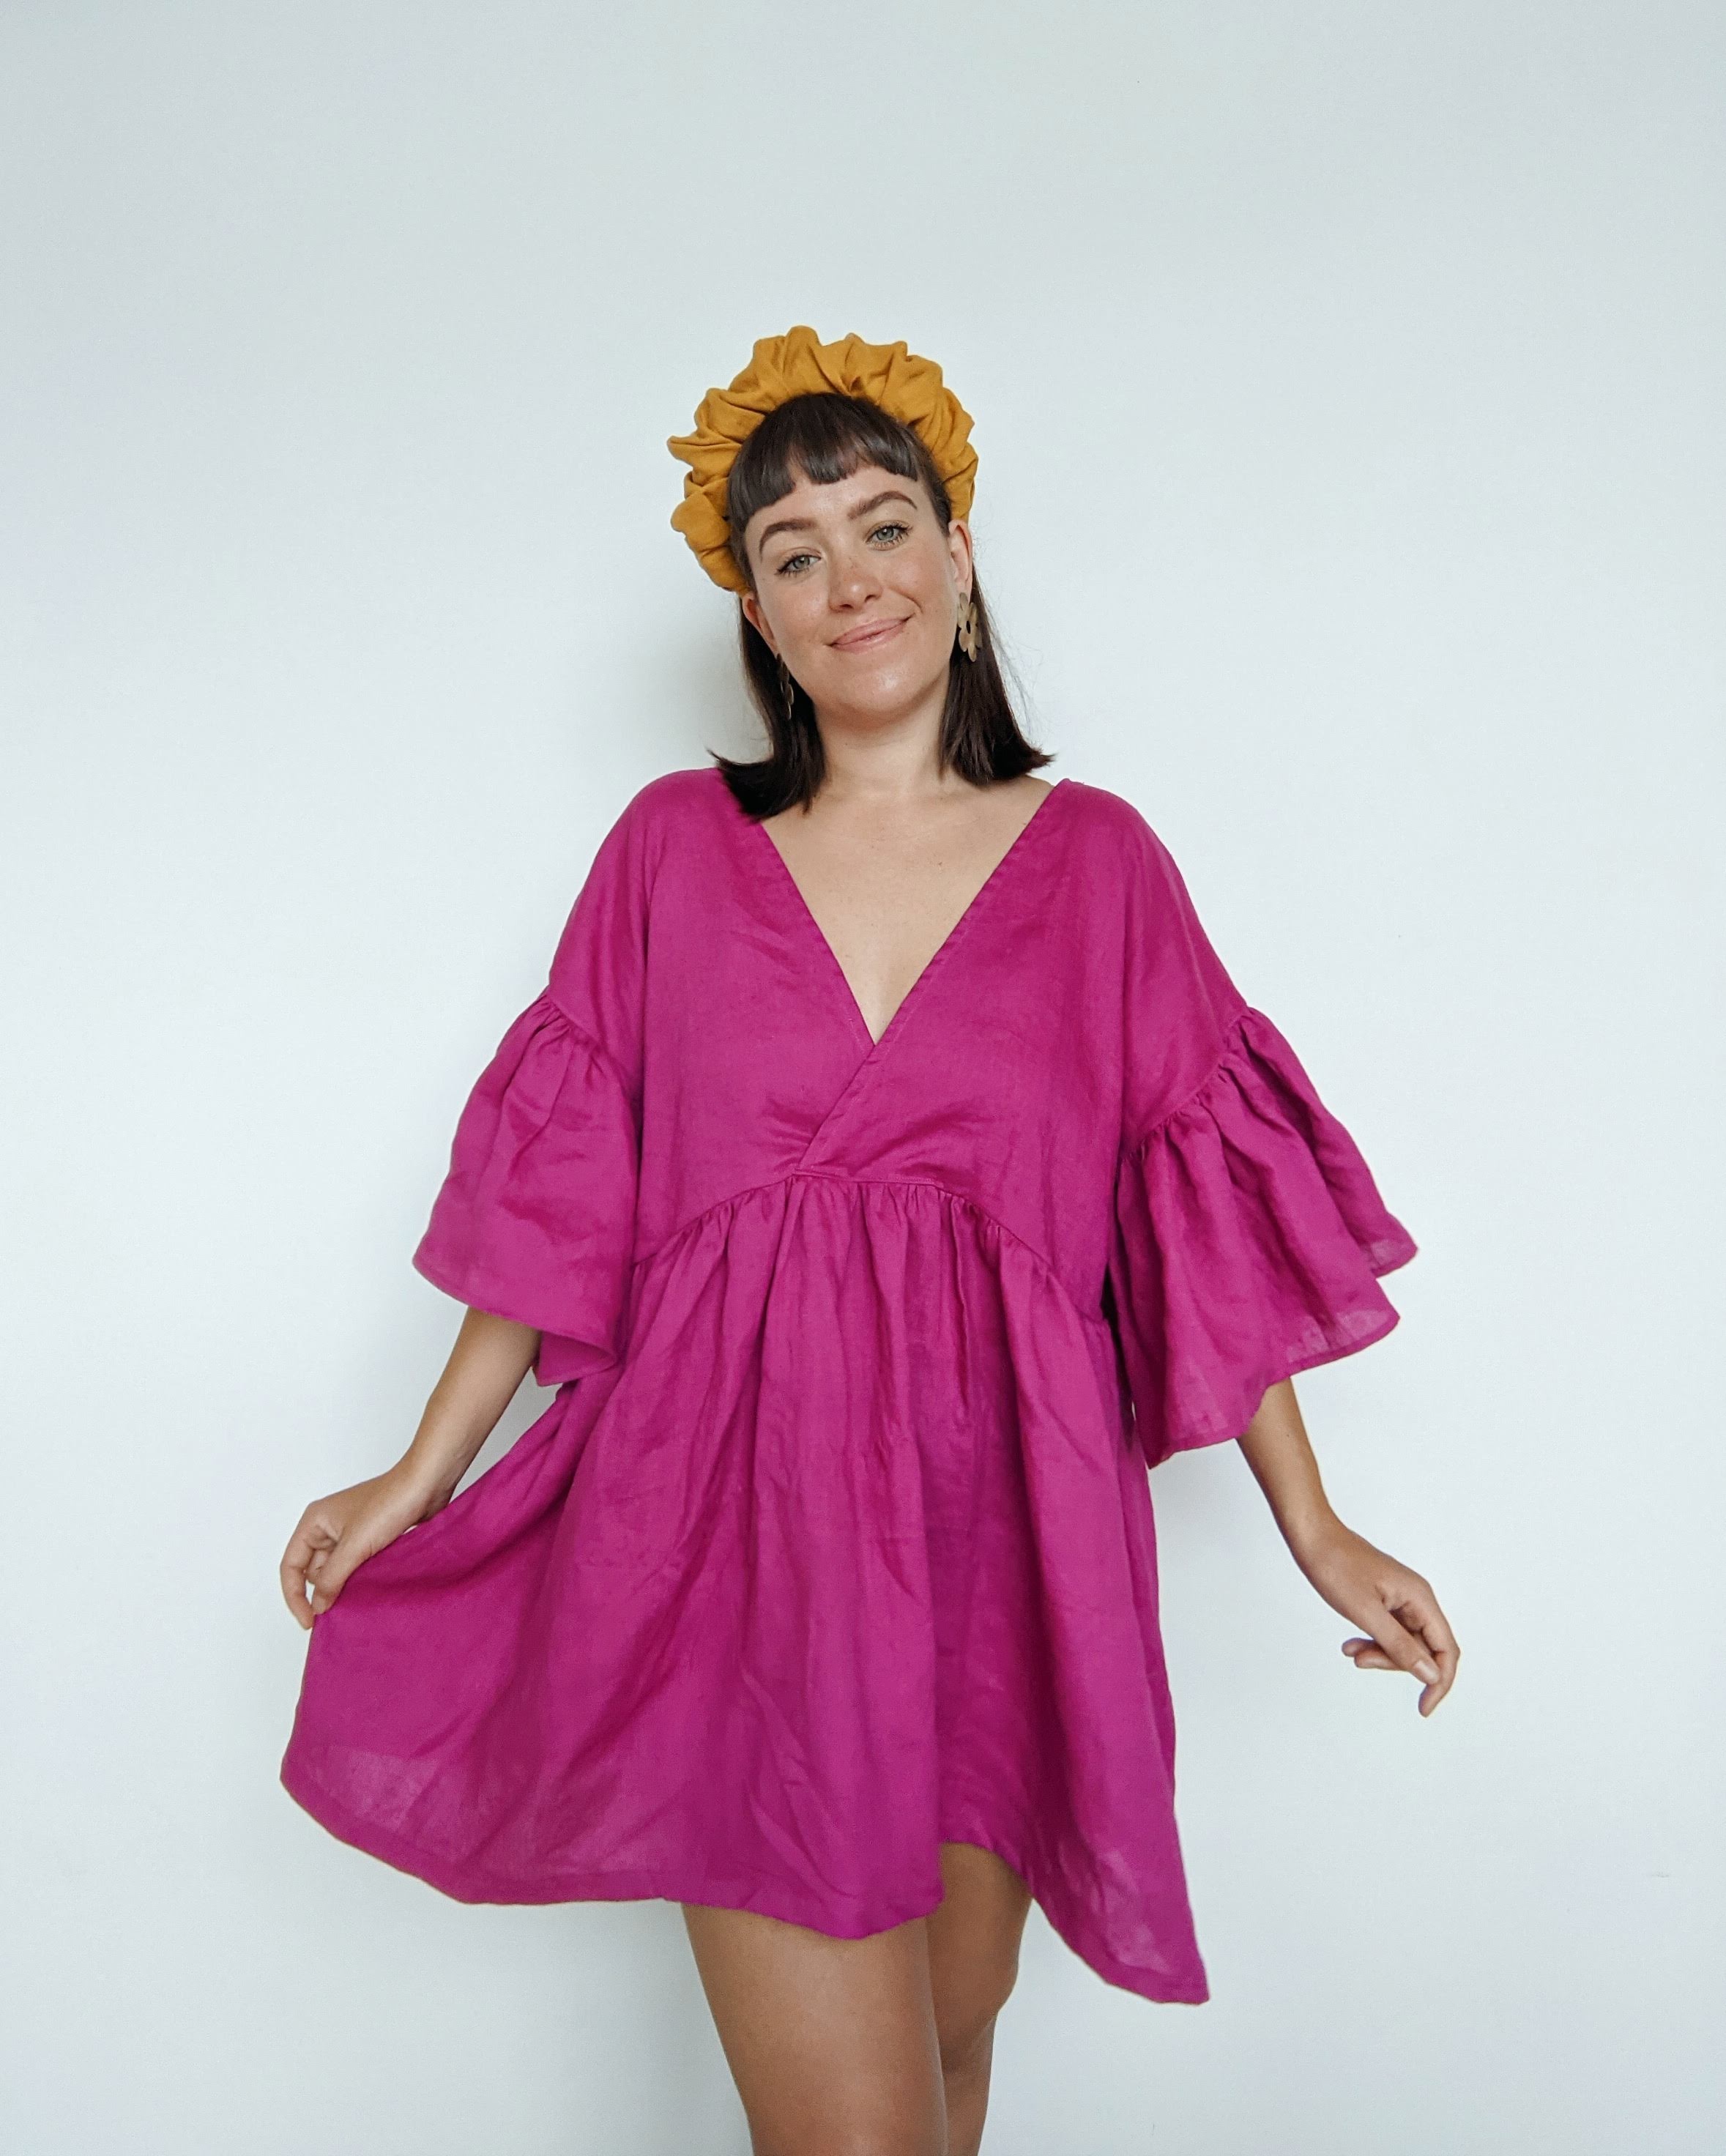 Daisy wears a vibrant, bright pink linen dress with a golden fabric crown headband.  She is holding one side out slightly to show the volume in the Maya ruffle dress skirt. 